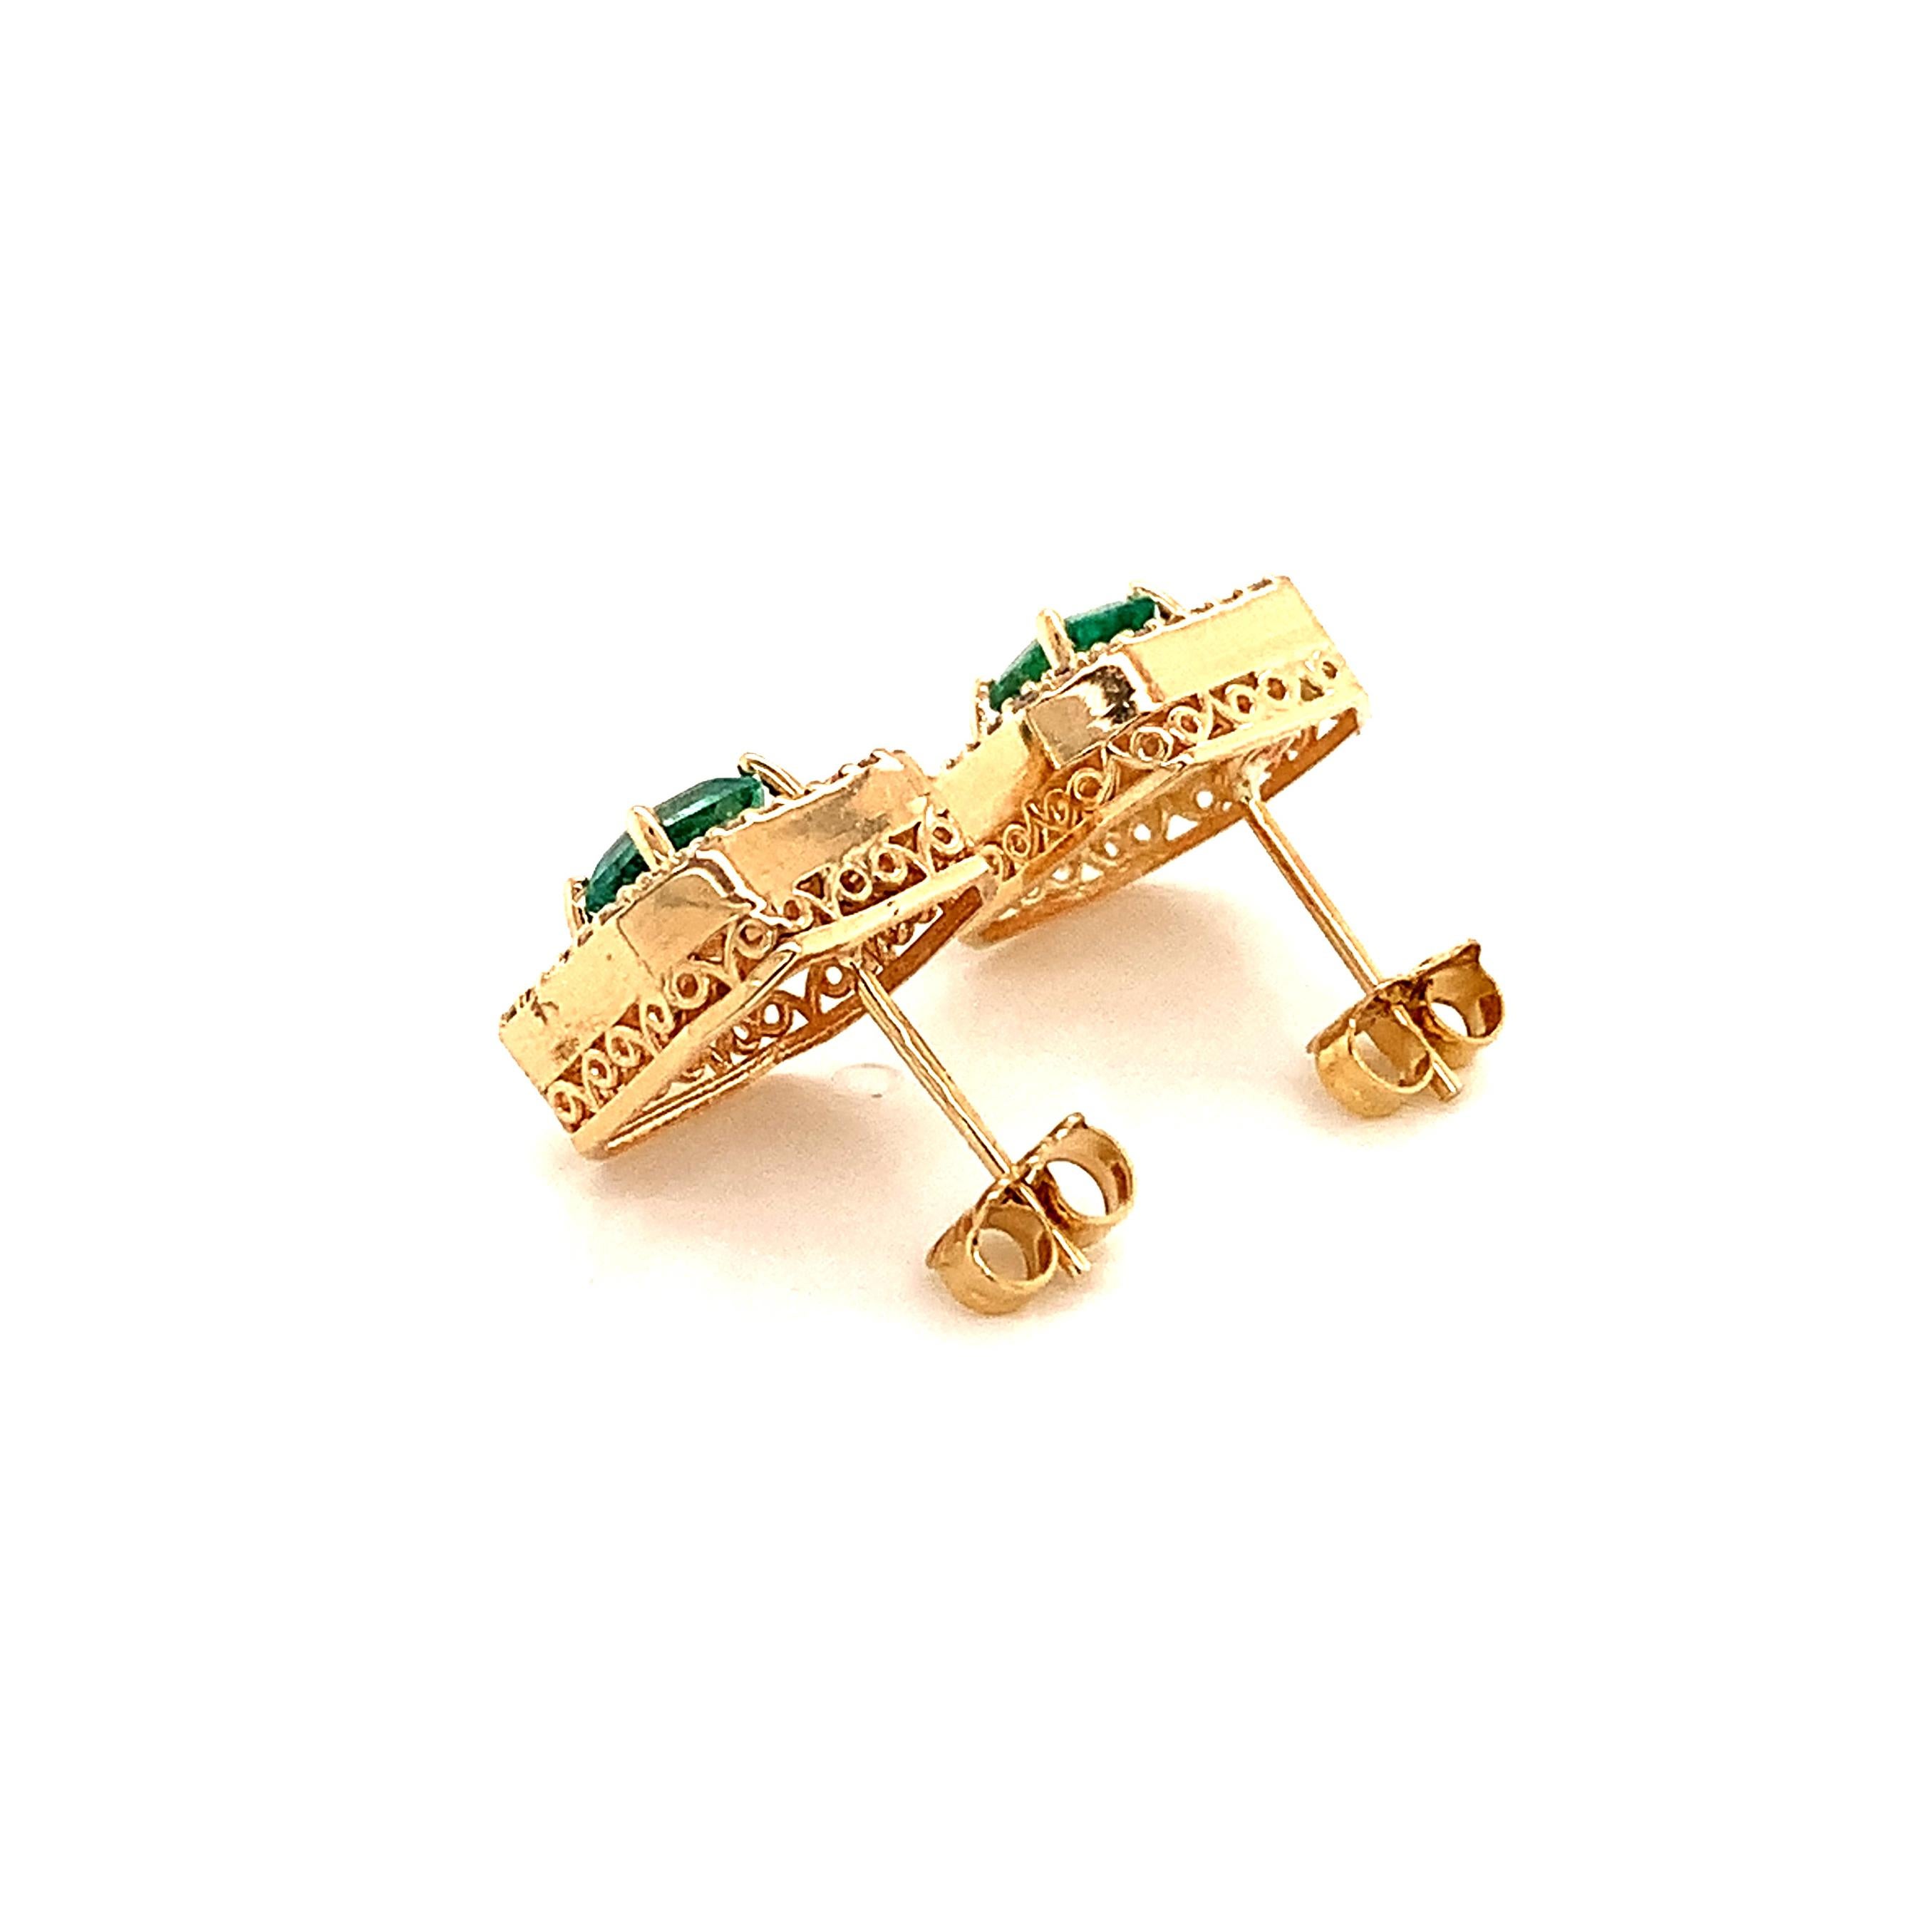 Natural Emerald Diamond Earrings 14k Gold 1.52 TCW Certified For Sale 2